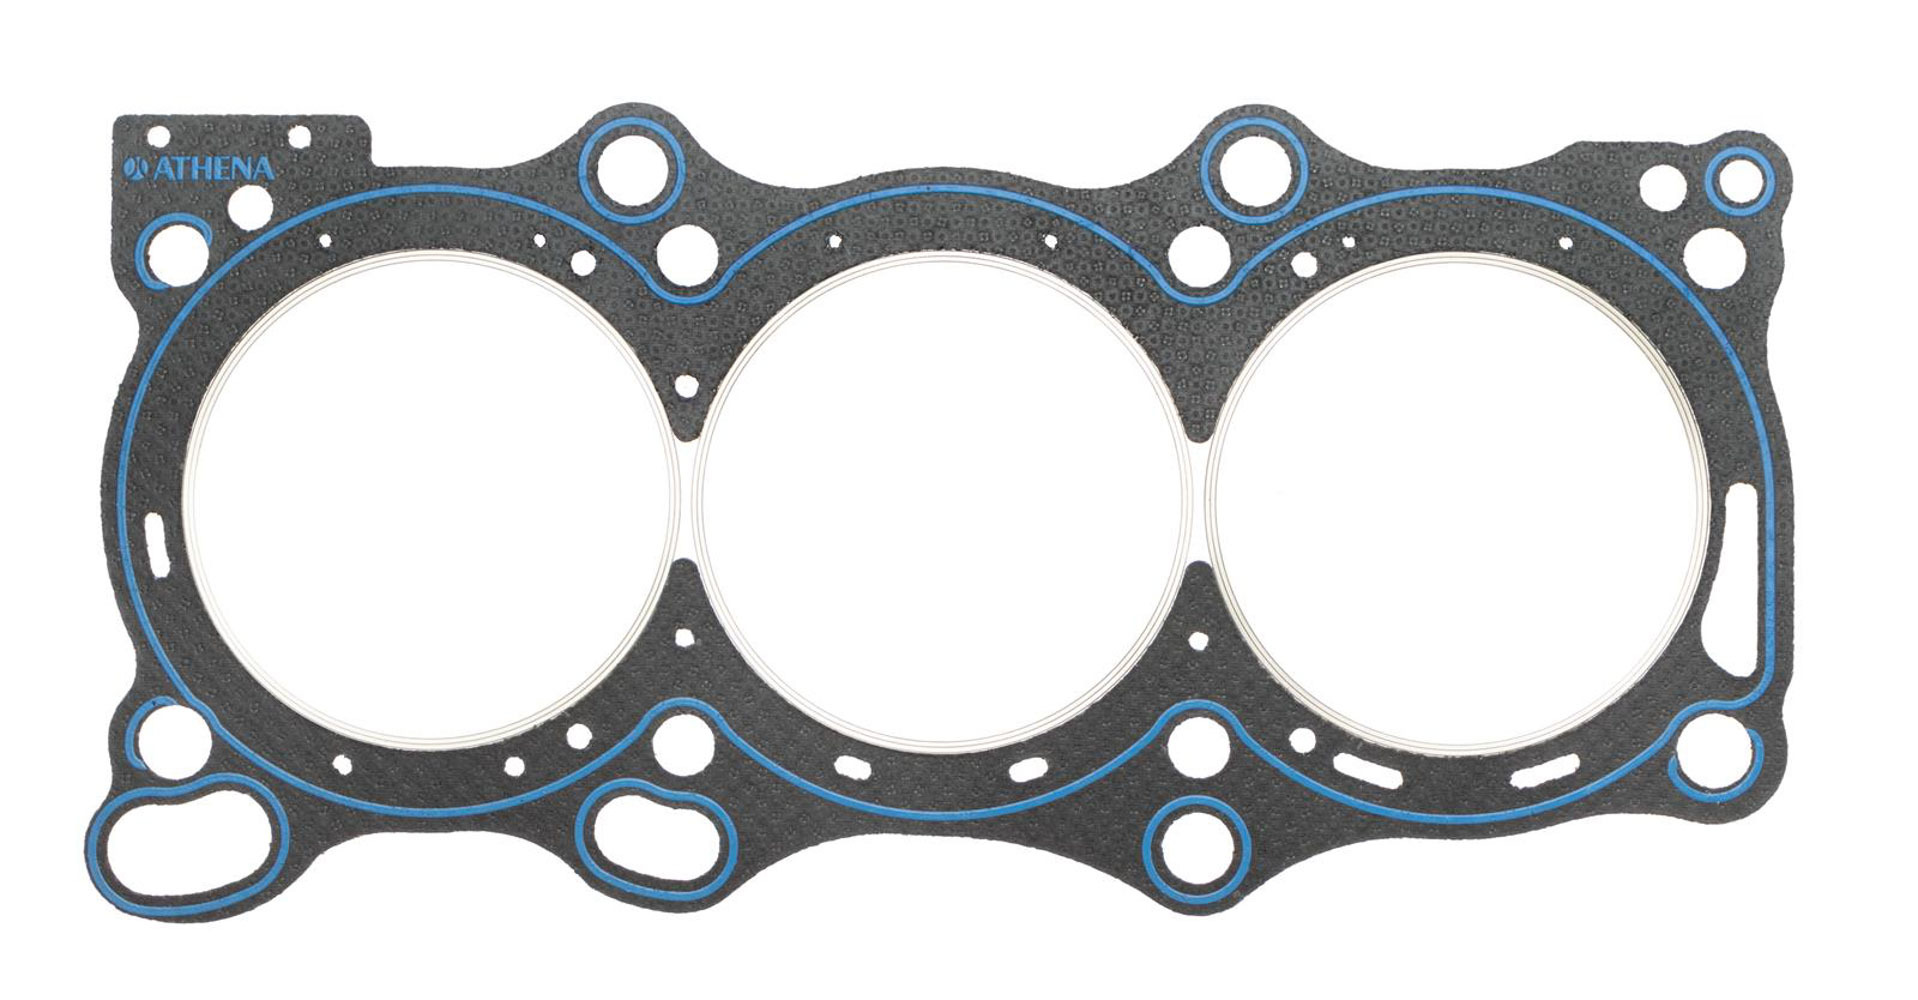 SCE Gaskets CR330087L - Cylinder Head Gasket, Vulcan Cut Ring, 96.50 mm Bore, 0.990 mm Compression Thickness, Steel Core Laminate, Driver Side, Nissan 4-Cylinder, Each